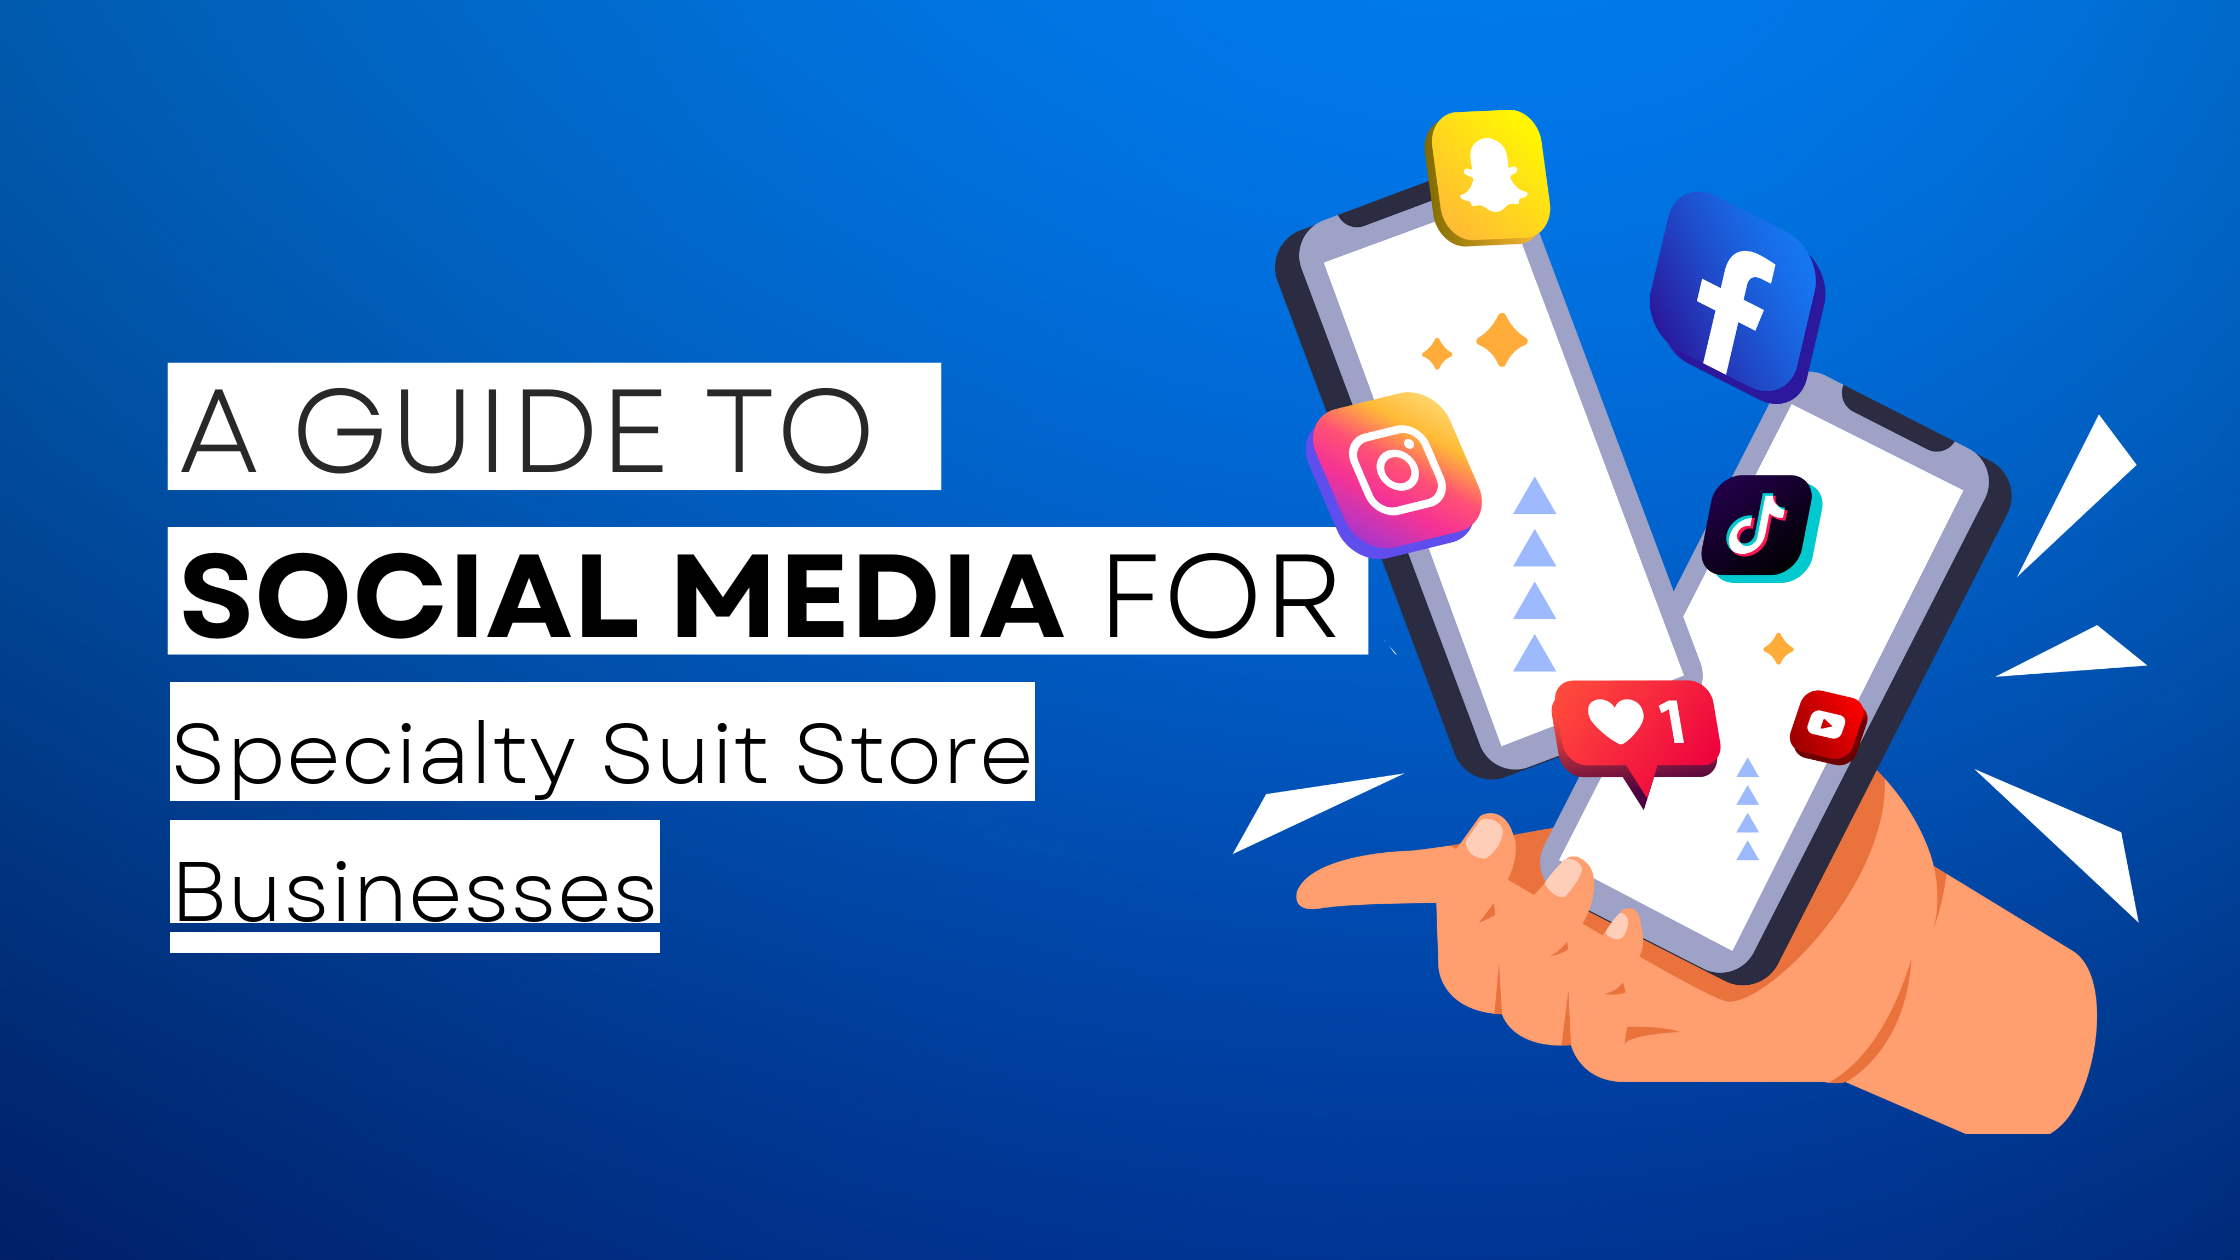 How to start Specialty Suit Store  on social media